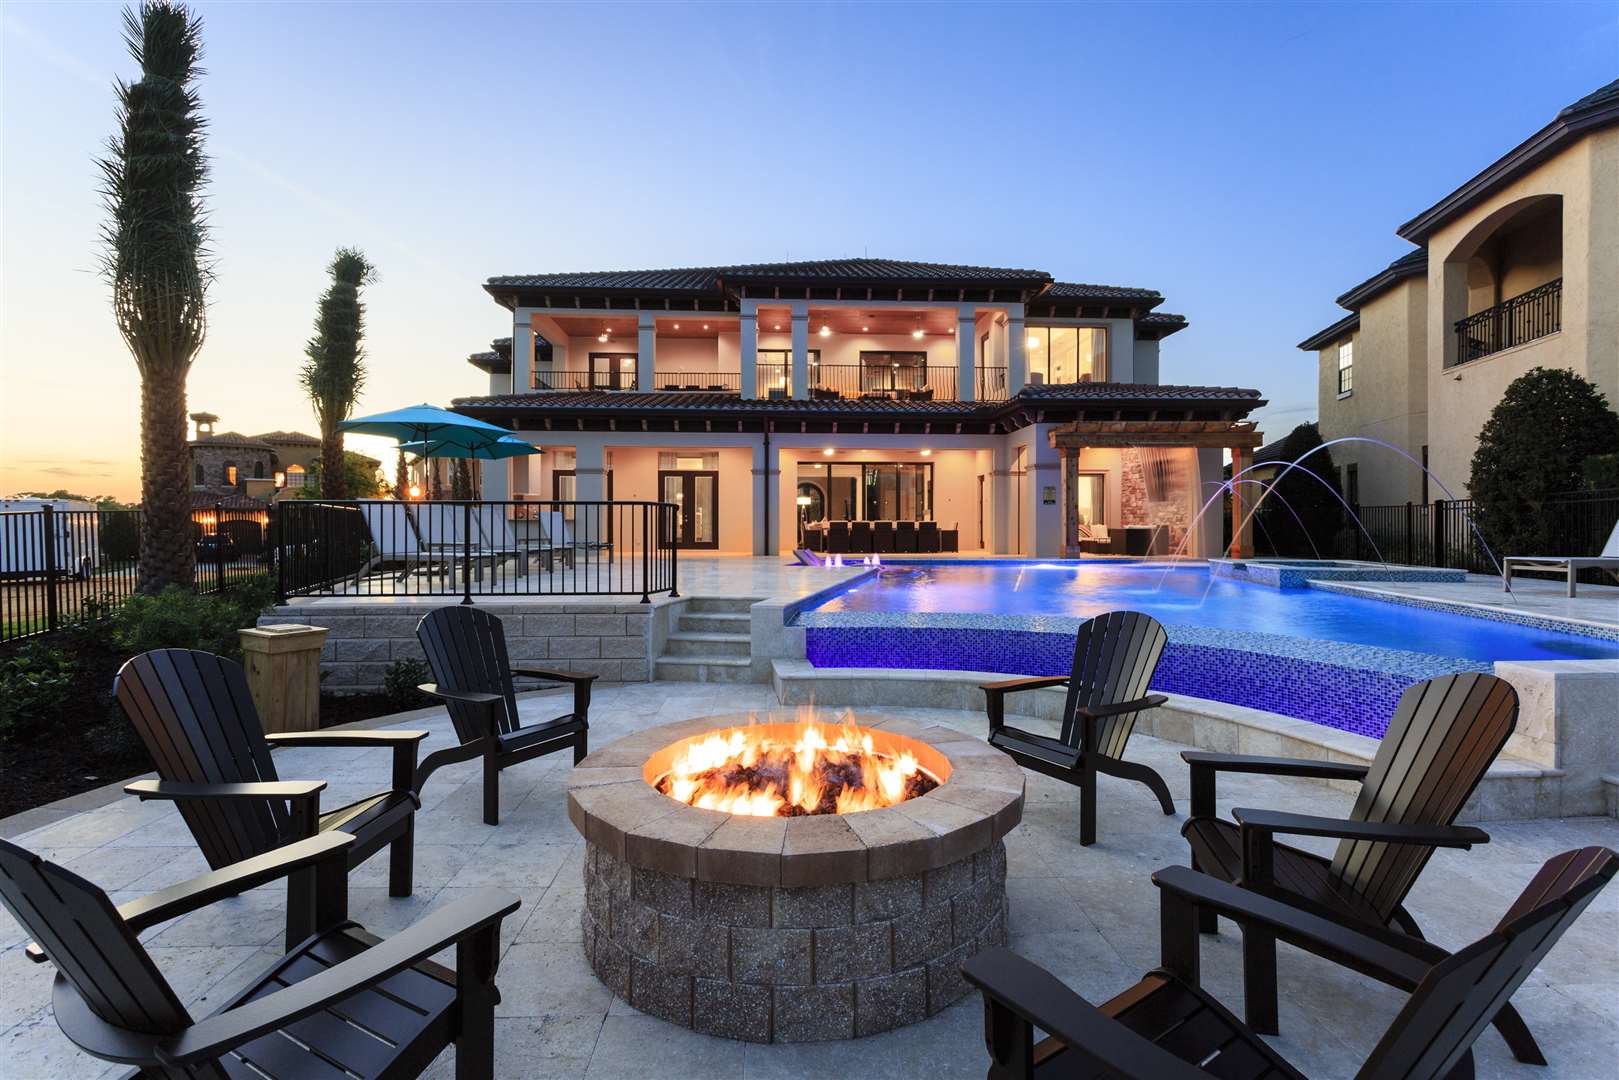 One of the luxury holiday homes offered by Top Villas, based in Orlando, Florida